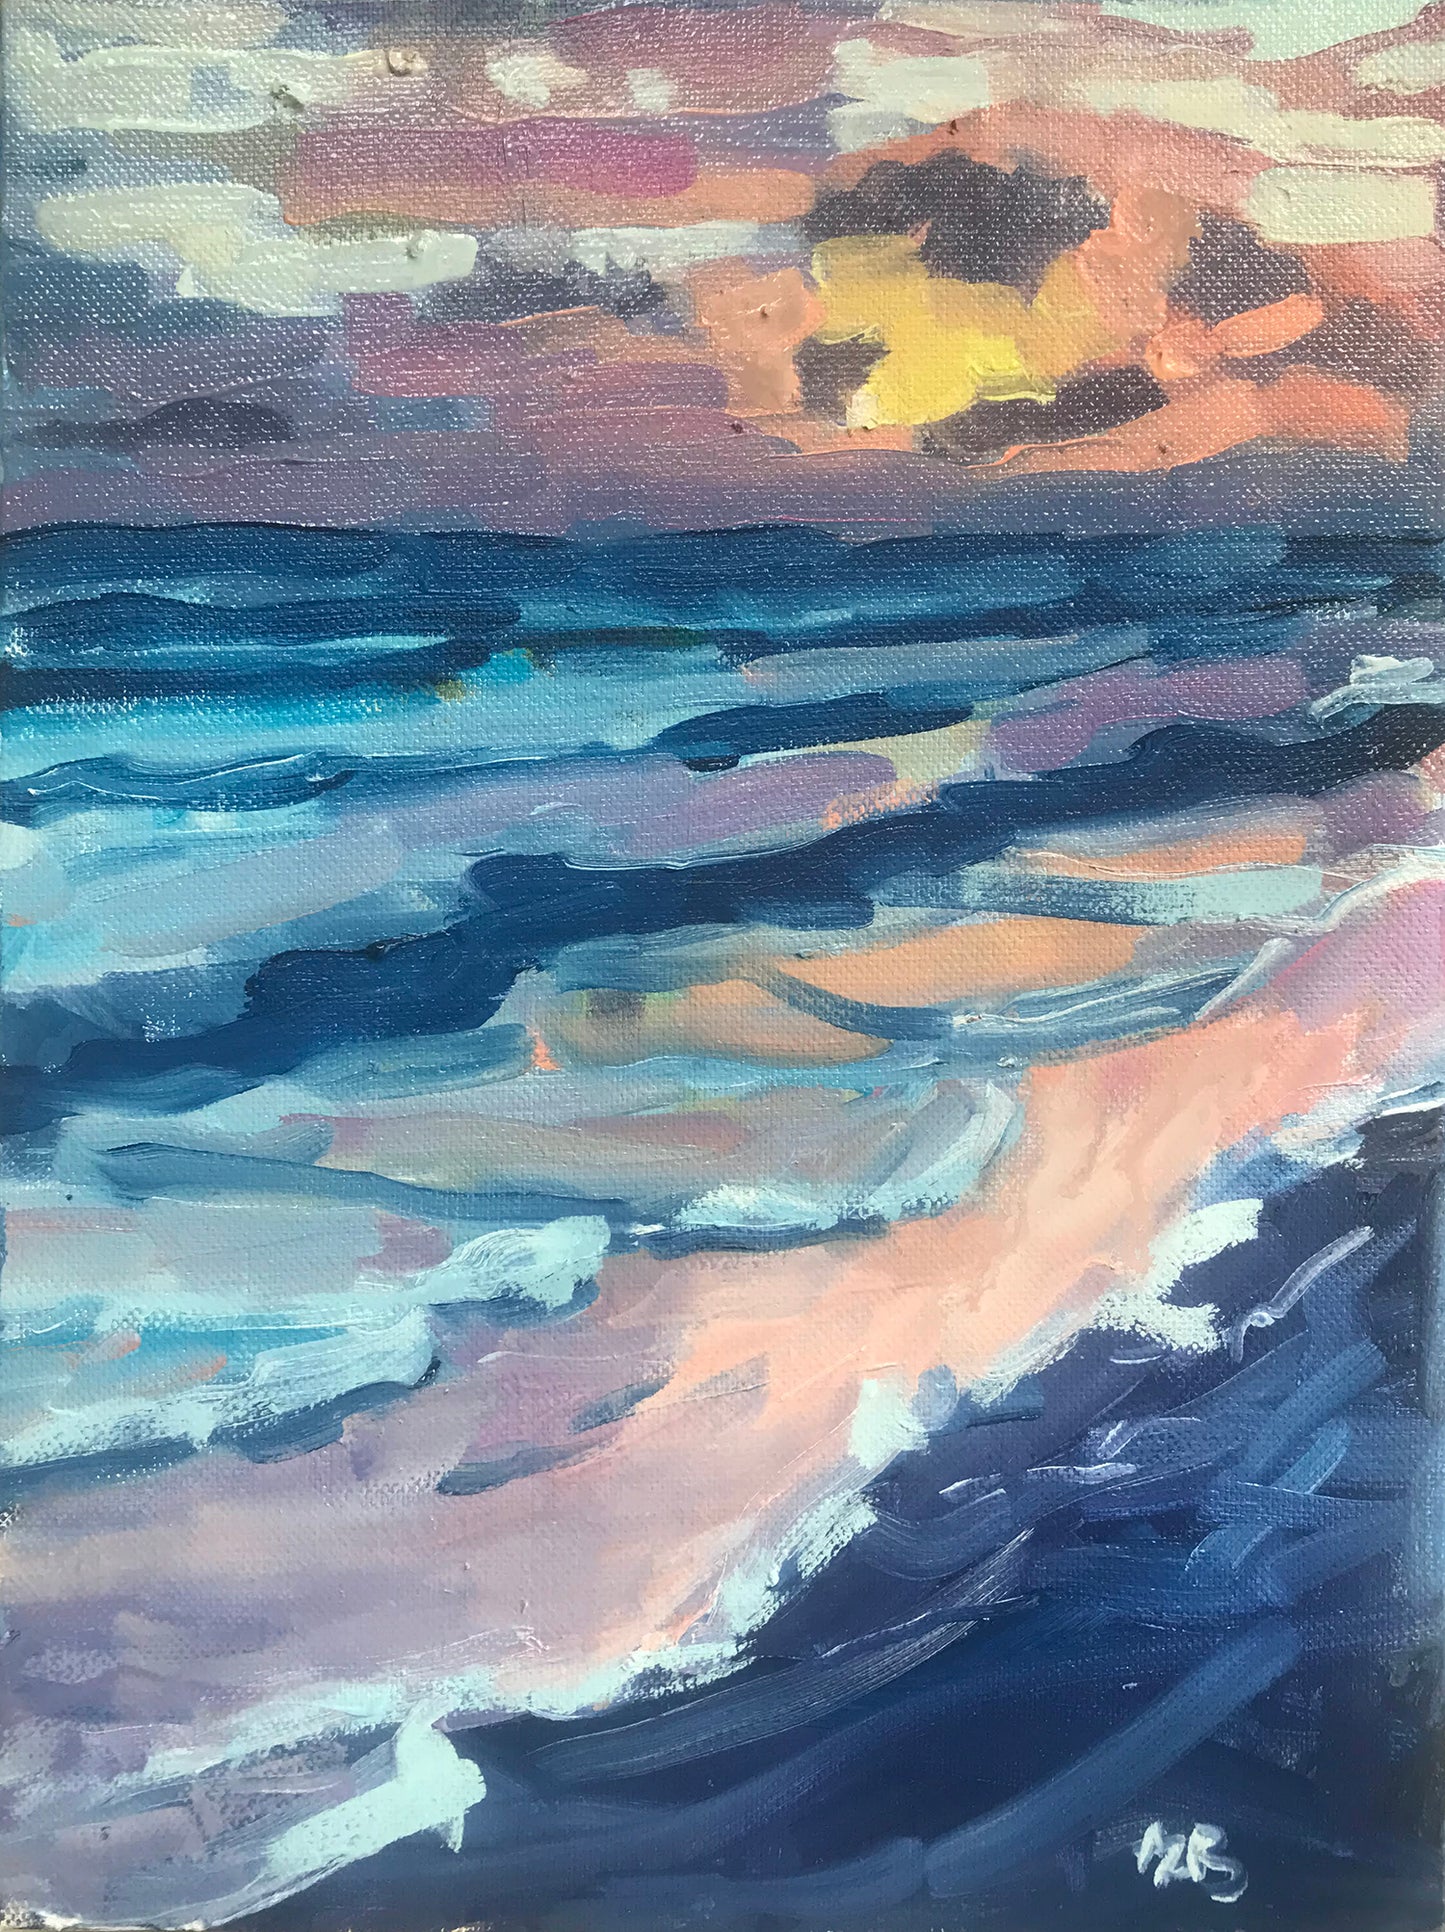 Sunset Over The Beach 9"x12" Inches, 2021